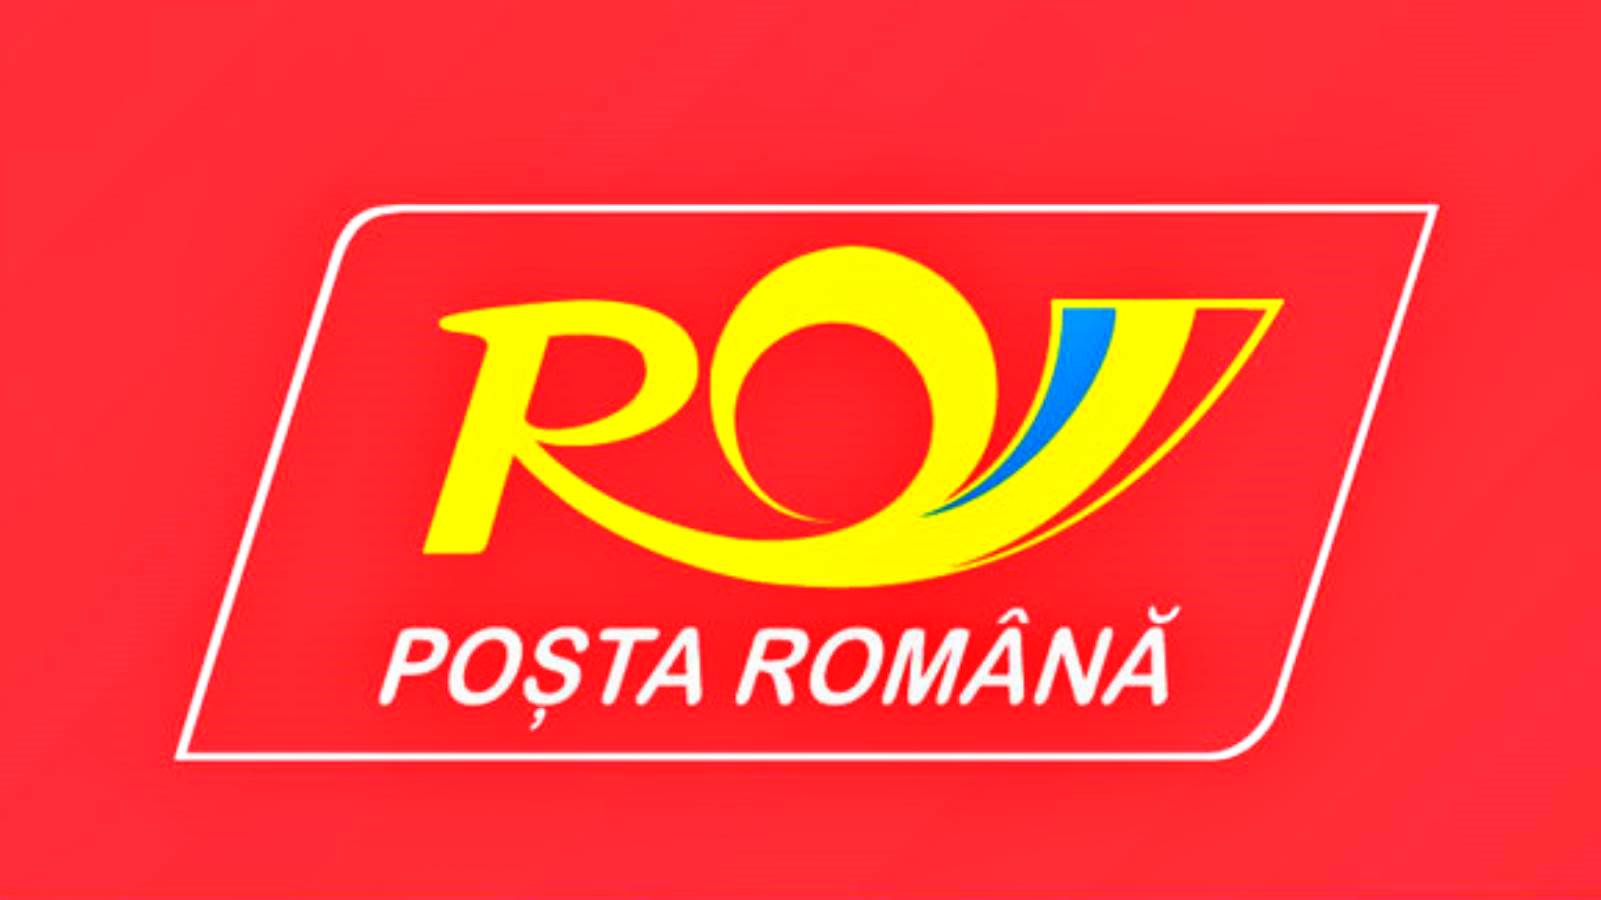 The Romanian Post Asks Romanians to Protect Against COVID-19